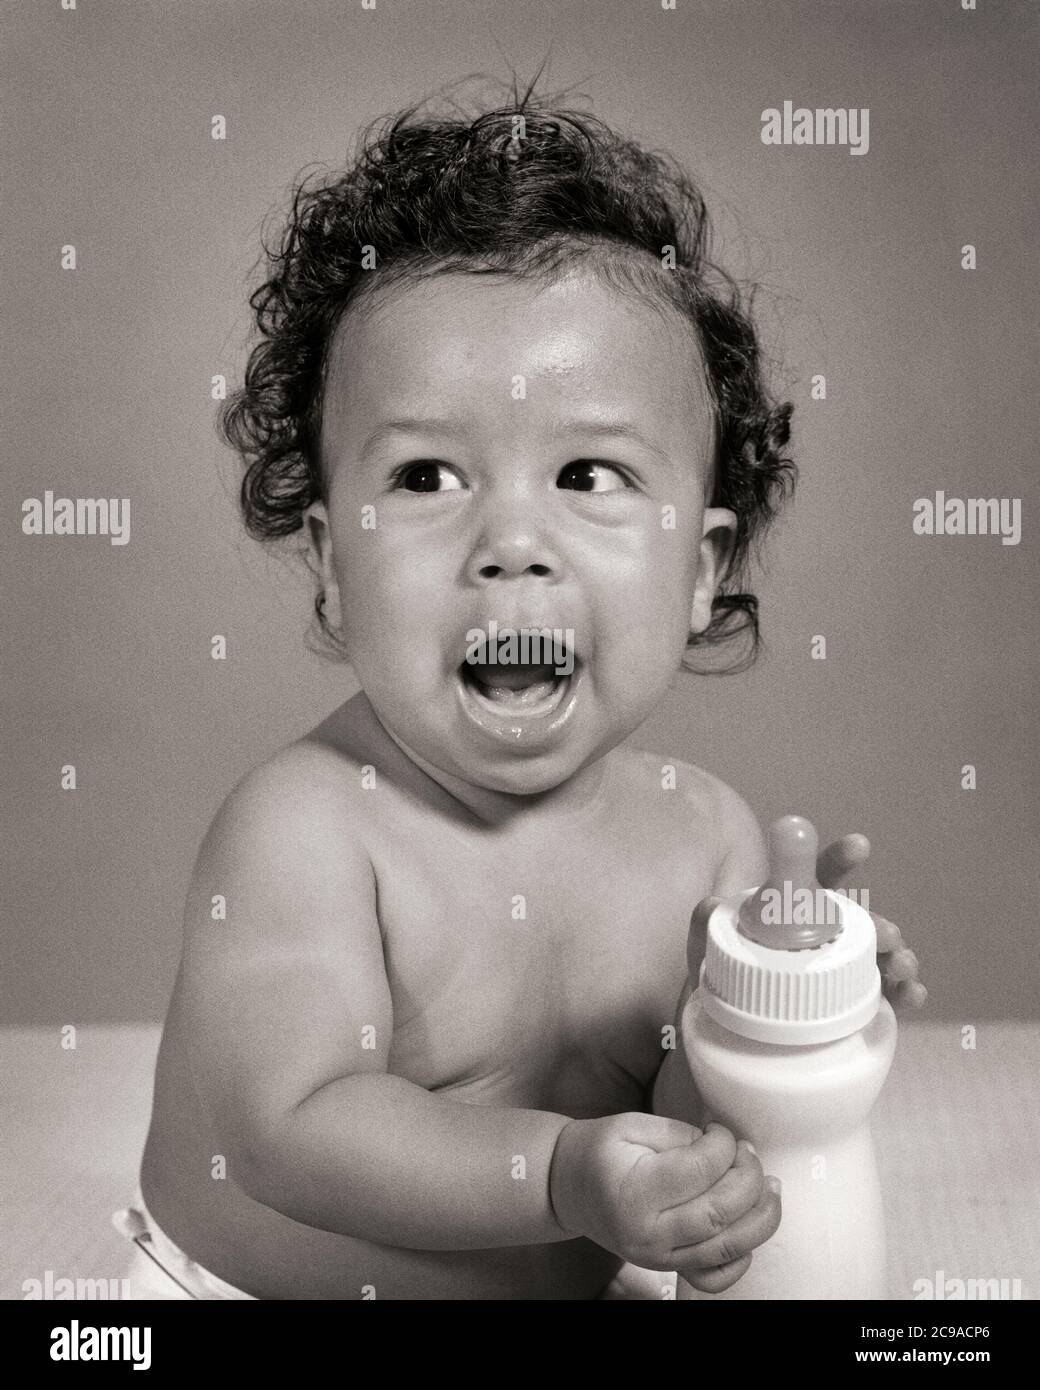 1960s SINGLE VOCALIZING AFRICAN-AMERICAN BABY BOY TODDLER SITTING HOLDING HIS OWN MILK BOTTLE  - n2149 HAR001 HARS PLEASED JOY LIFESTYLE HEALTHINESS HOME LIFE COPY SPACE HALF-LENGTH MALES B&W HUMOROUS HUNGRY WELLNESS CHEERFUL HIS AFRICAN-AMERICANS AFRICAN-AMERICAN EXCITEMENT LOUD BLACK ETHNICITY COMICAL SMILES CONCEPTUAL COMEDY JOYFUL STYLISH VOCALIZING COOPERATION GROWTH JUVENILES OWN BLACK AND WHITE HAR001 OLD FASHIONED AFRICAN AMERICANS Stock Photo